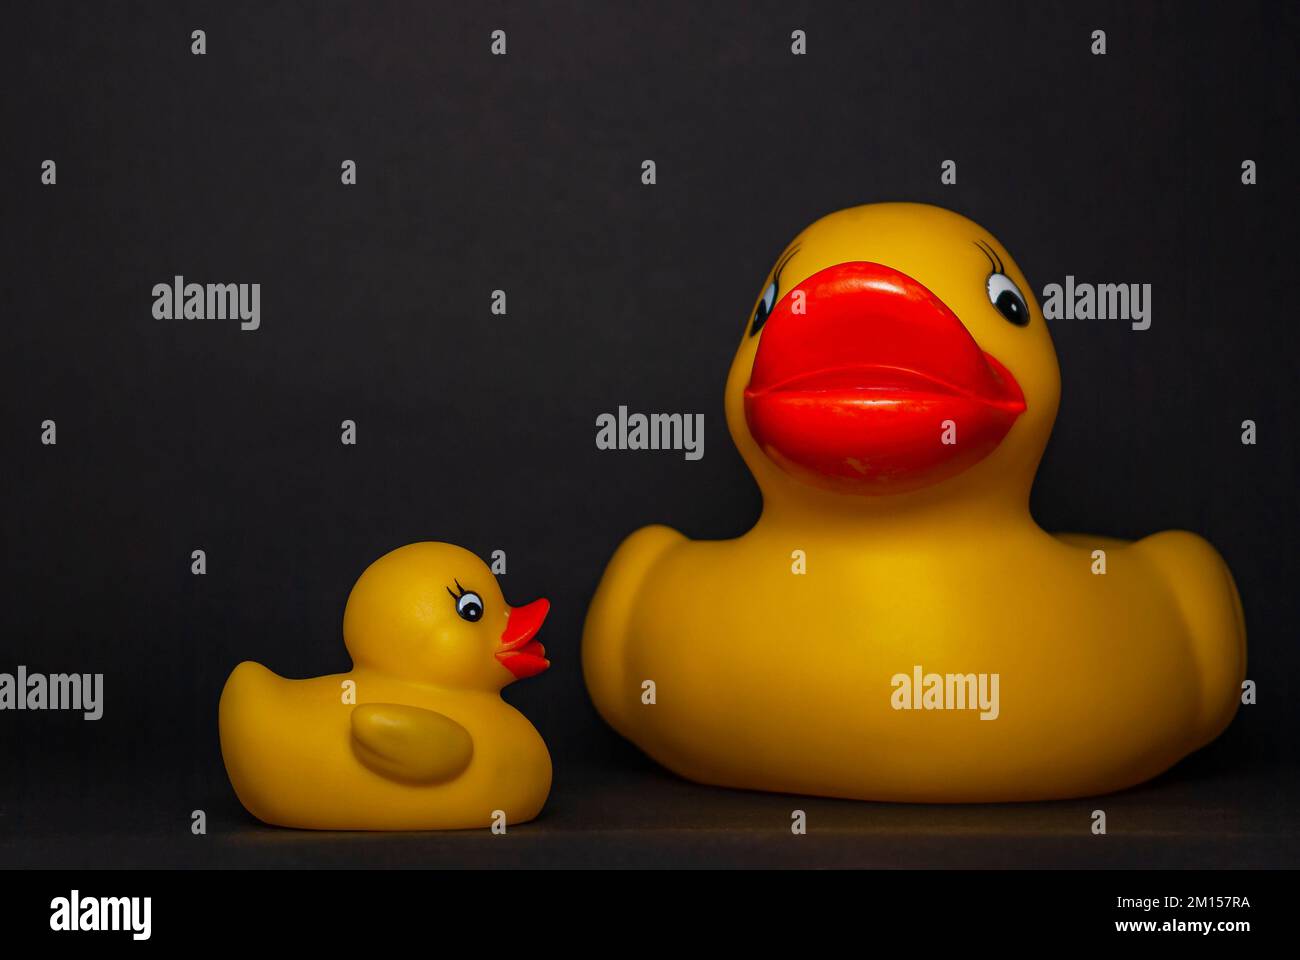 Two rubber ducks, large and small, isolated against a black background, concept of toddler play and the relationship of mother and child. Stock Photo